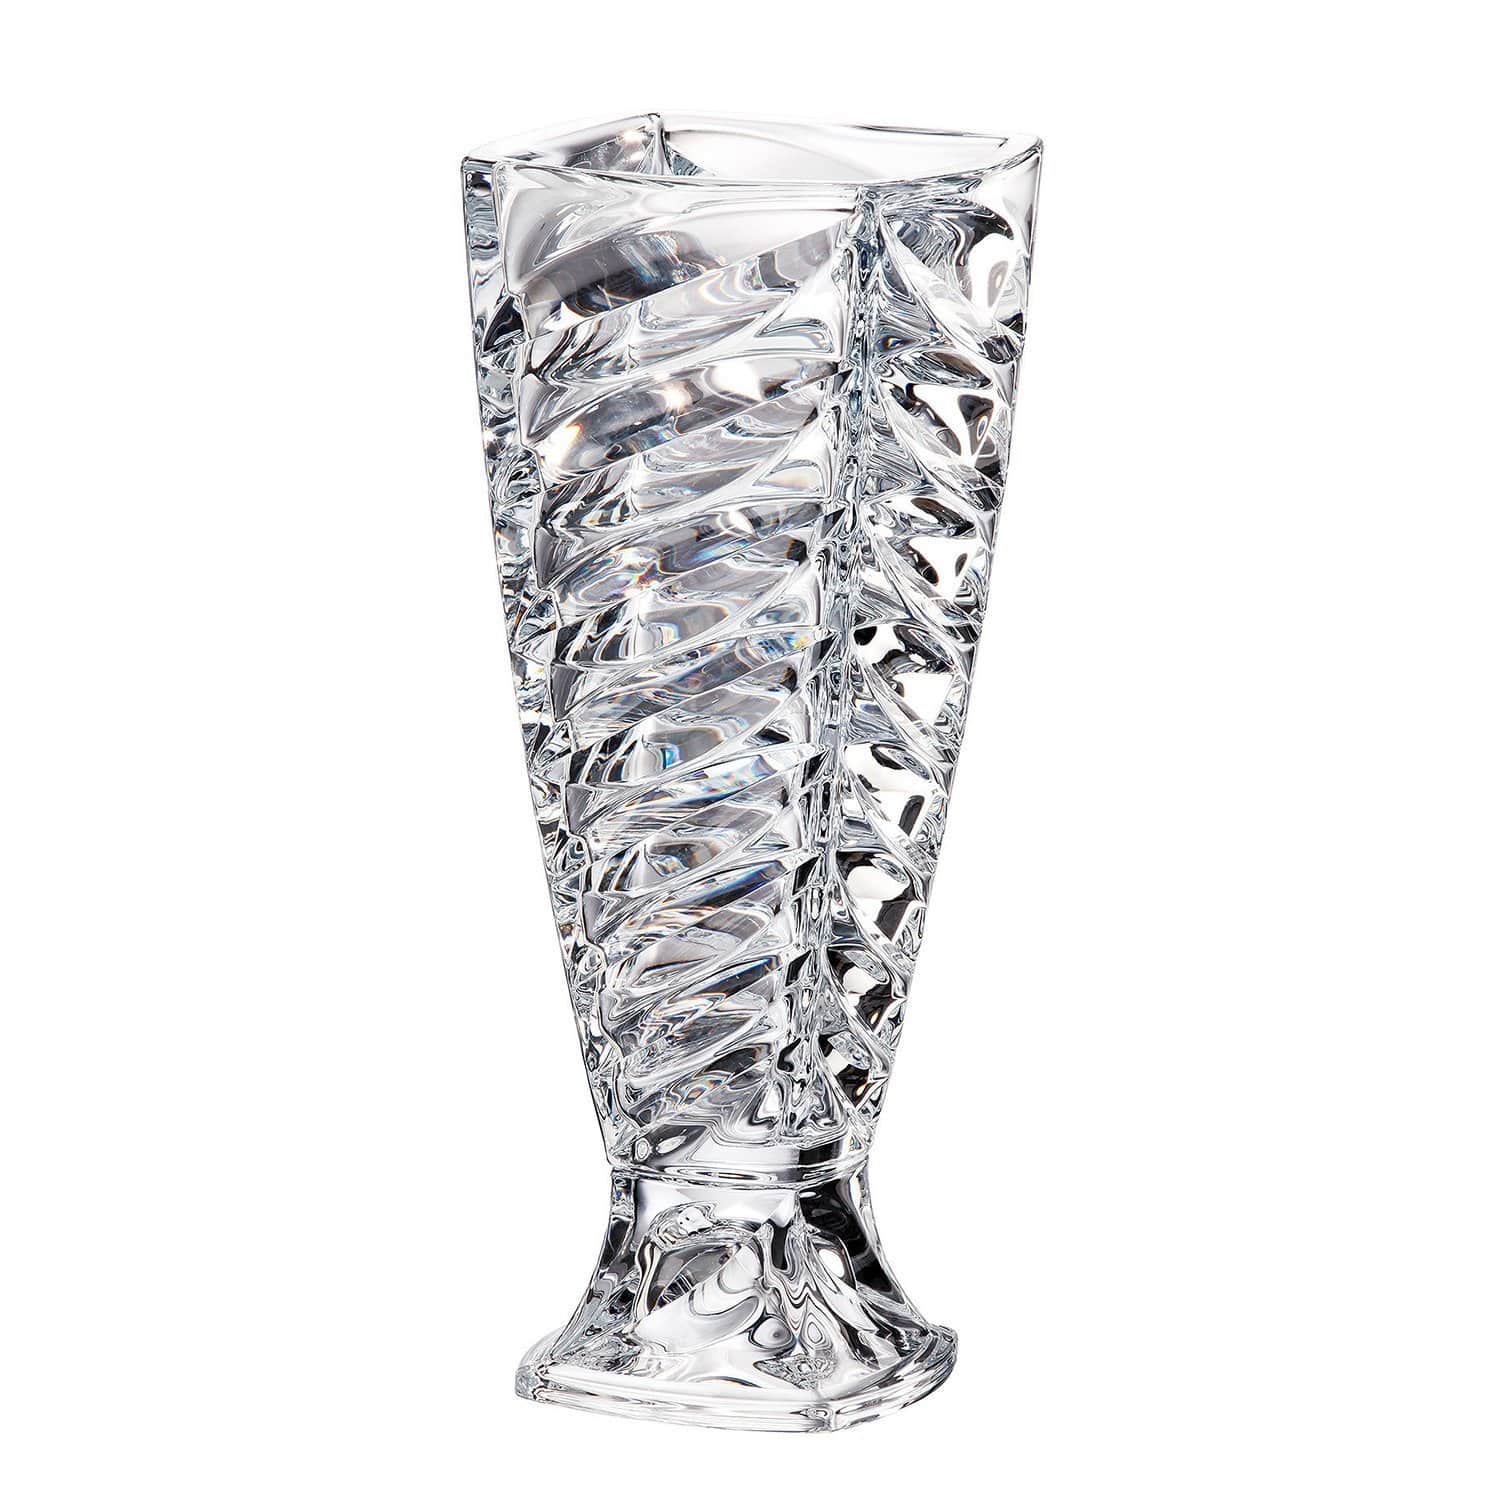 Bohemia Crystal Glass Footed Facet Vase - 37.5 cm - 5390928 - Jashanmal Home